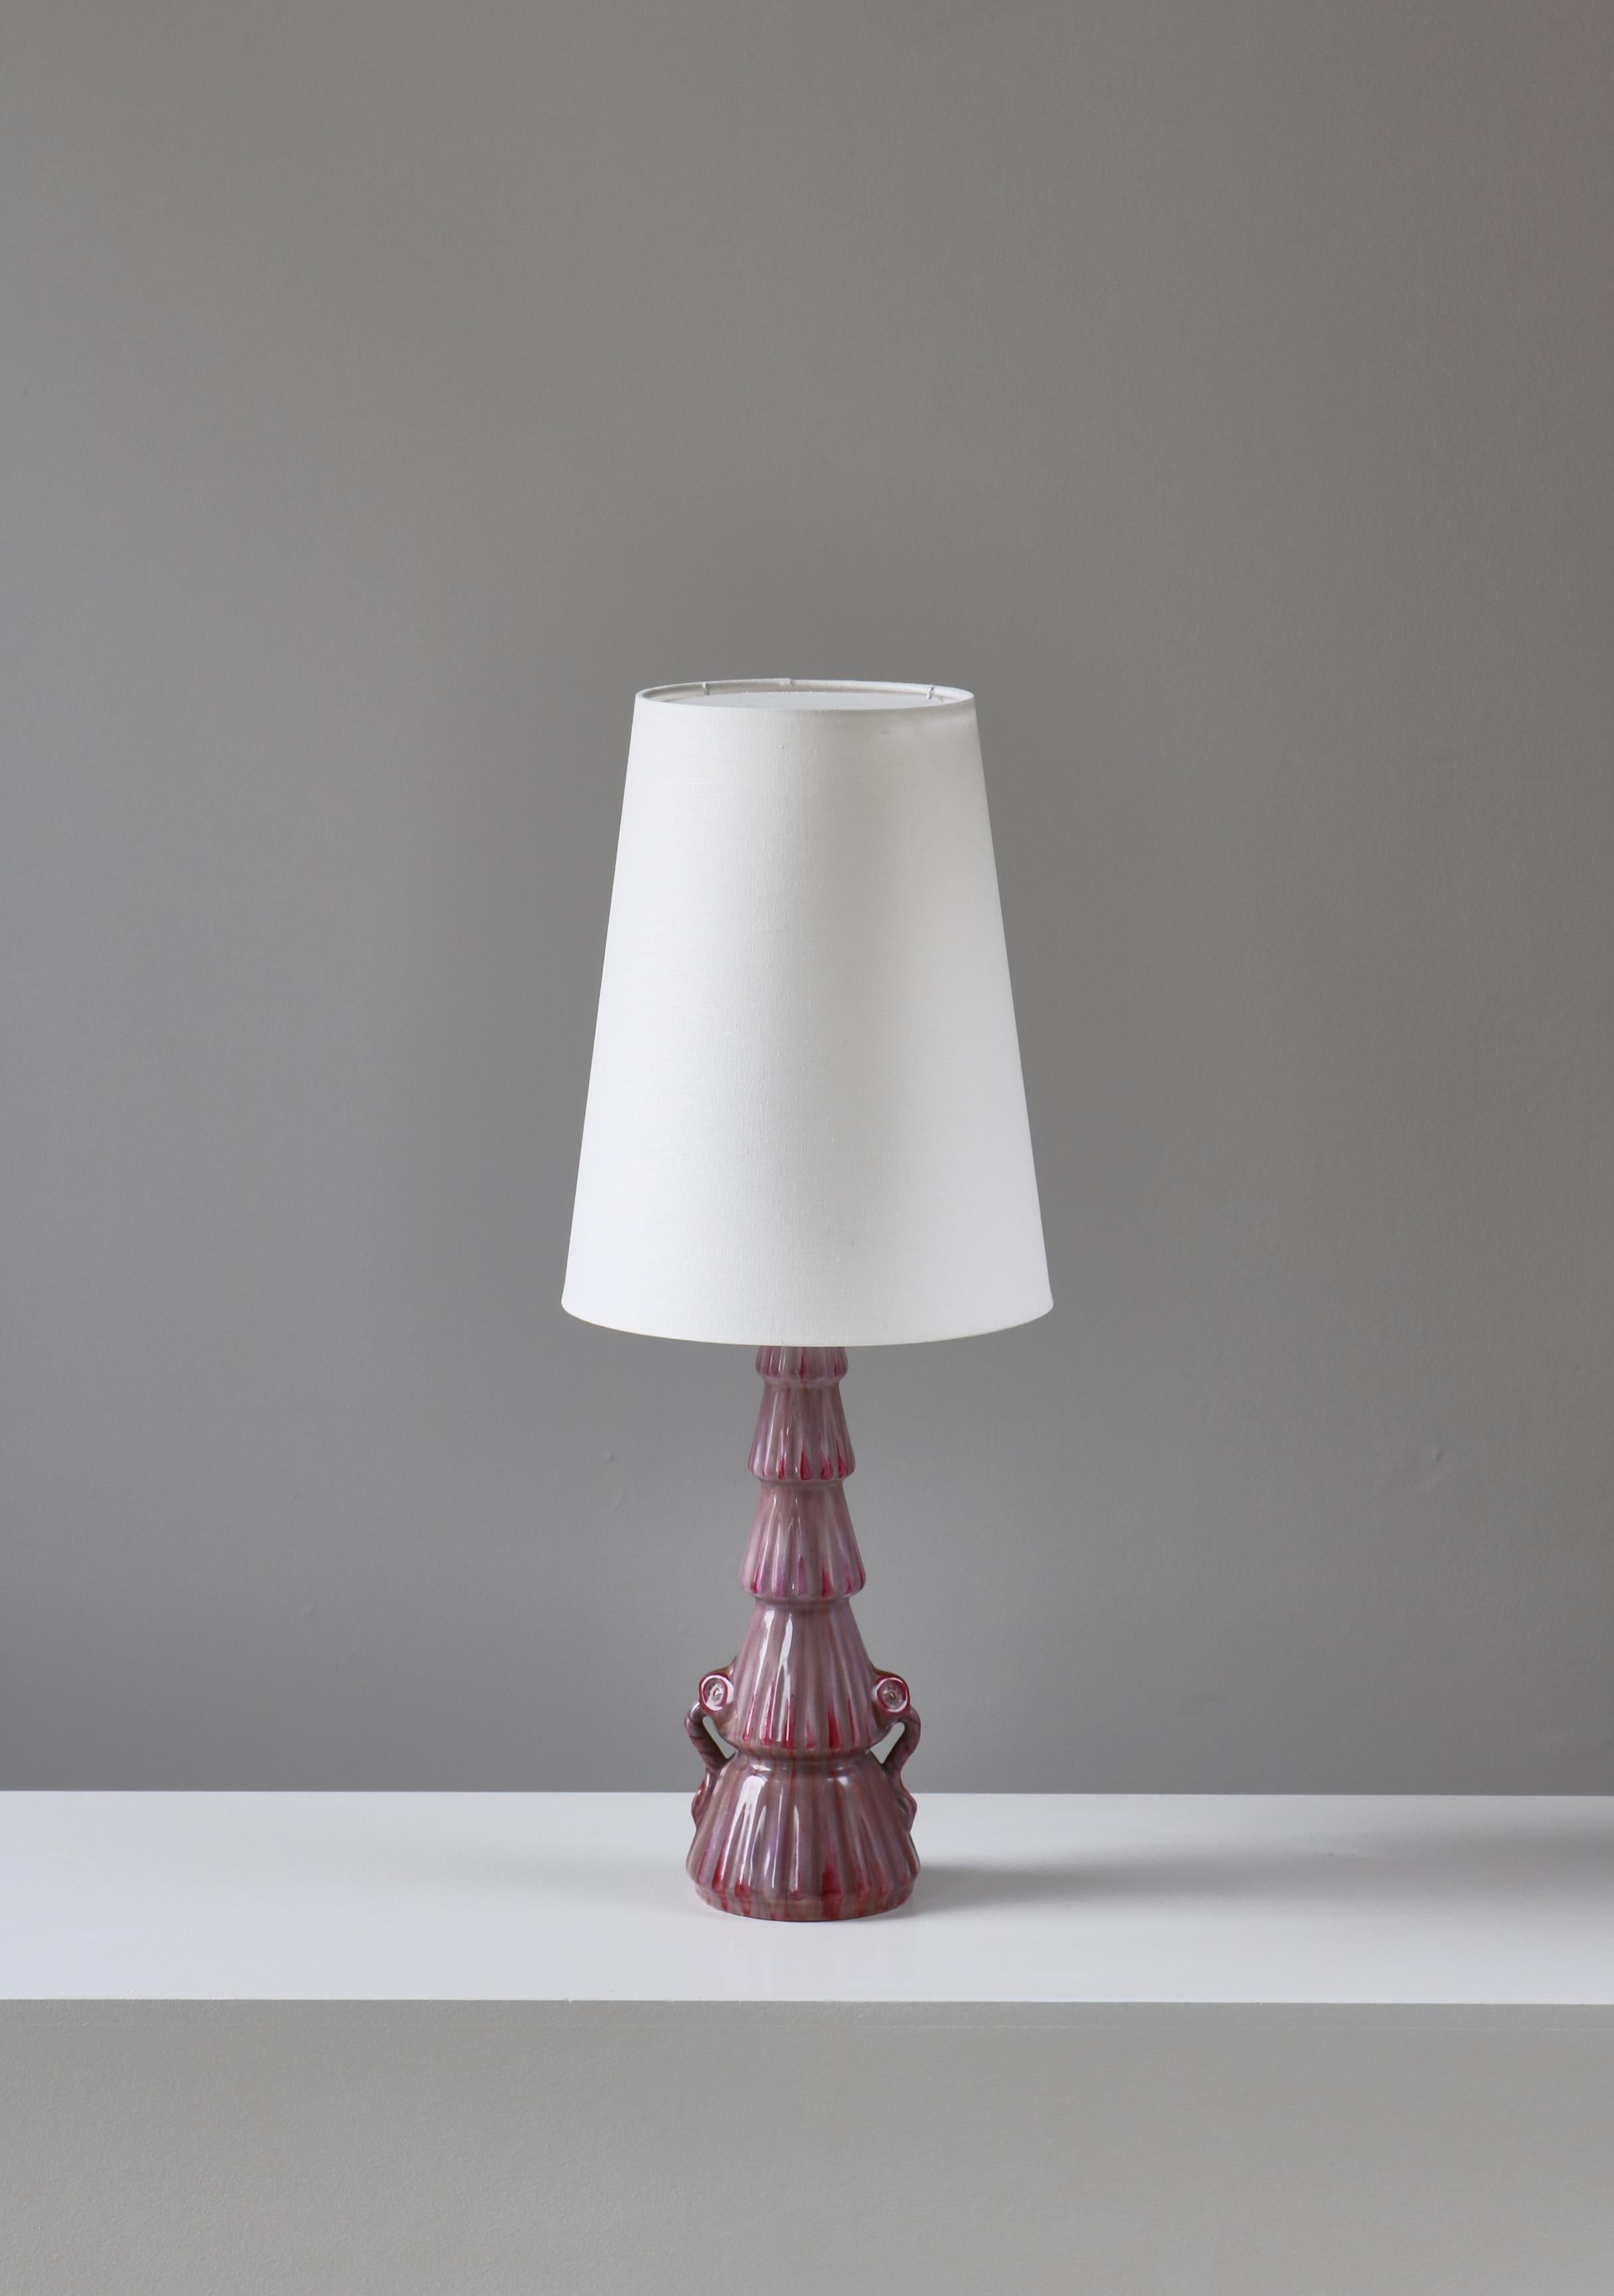 Swedish Grace Porcelain Table Lamp Pink / Purple Glazing, Louise Adelborg, 1920s In Good Condition For Sale In Odense, DK